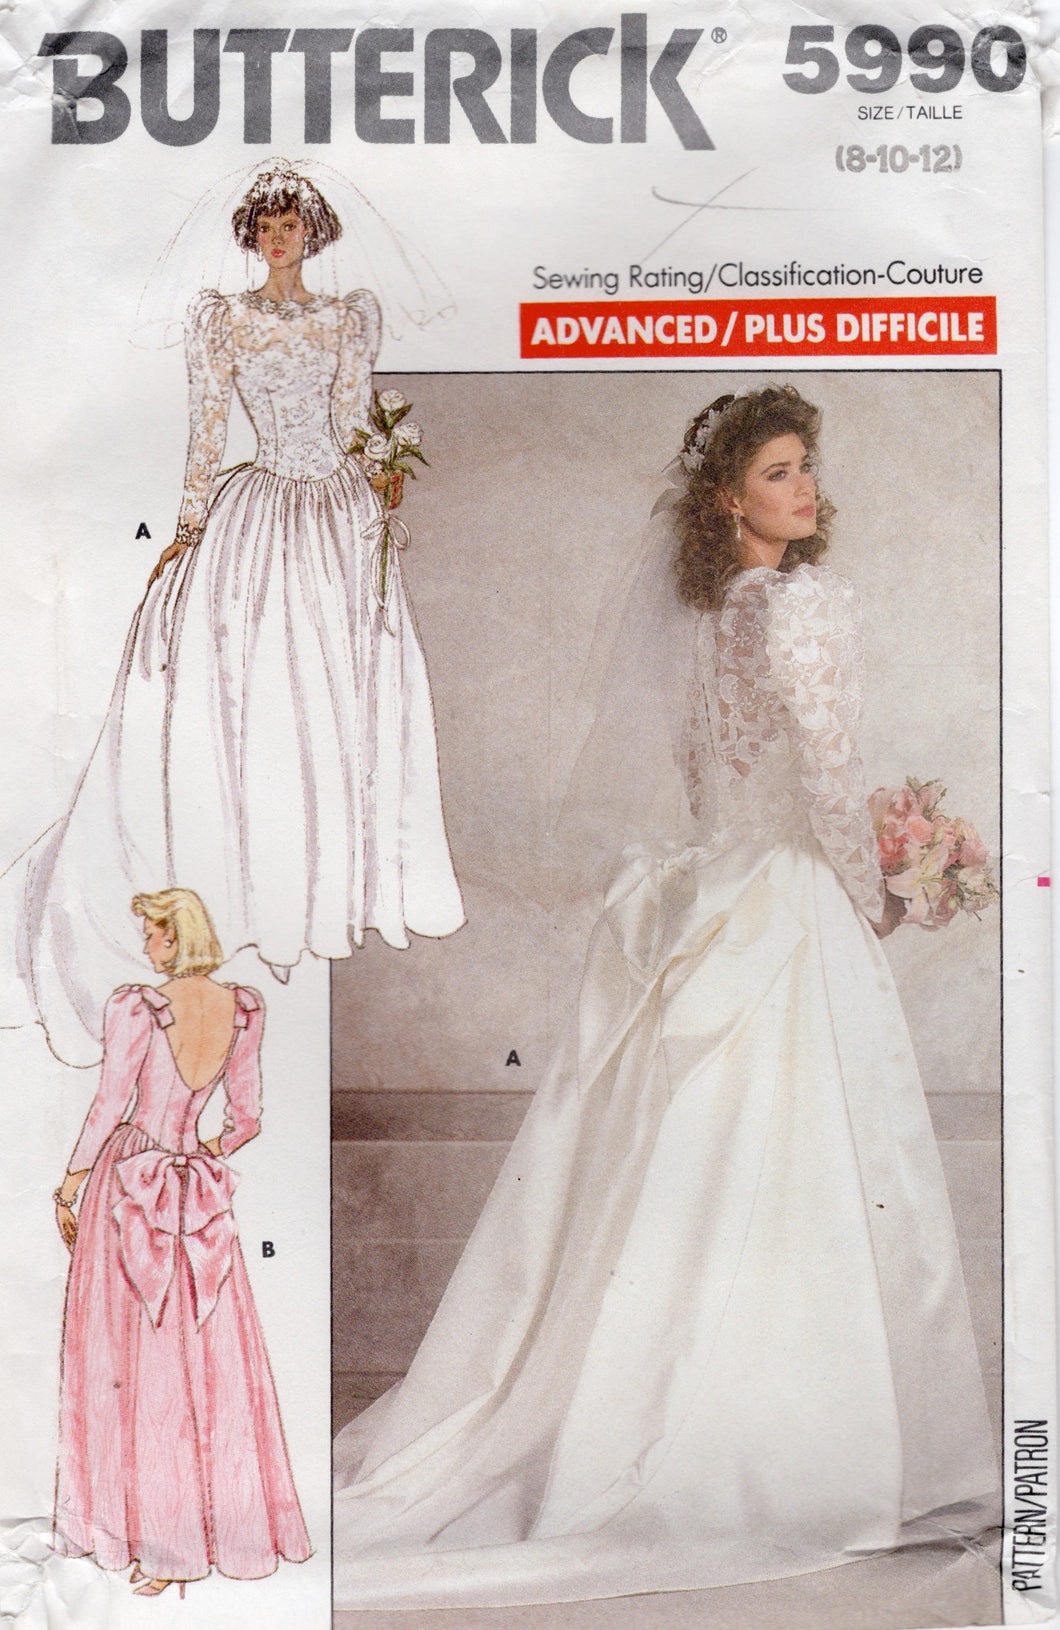 1980's Butterick Wedding Dress Pattern, High Neckline and Low Back Bridal Gown and Bridesmaid Dress - Bust 31.5-34